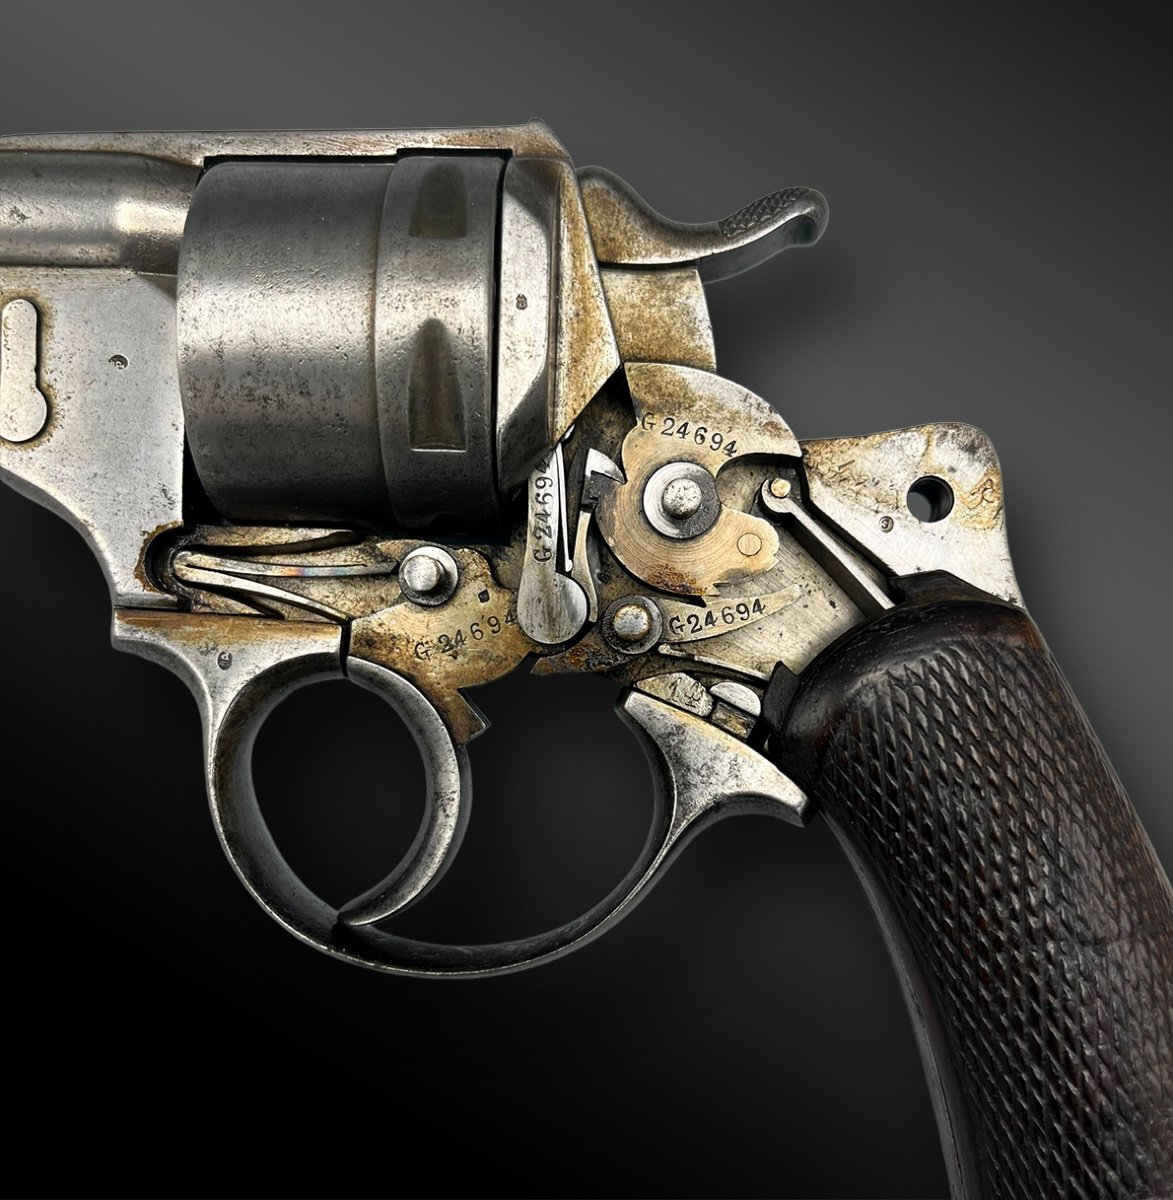 Model 1873 Revolver, From The Saint-etienne Weapons Manufacture - France - 19th Century-photo-3